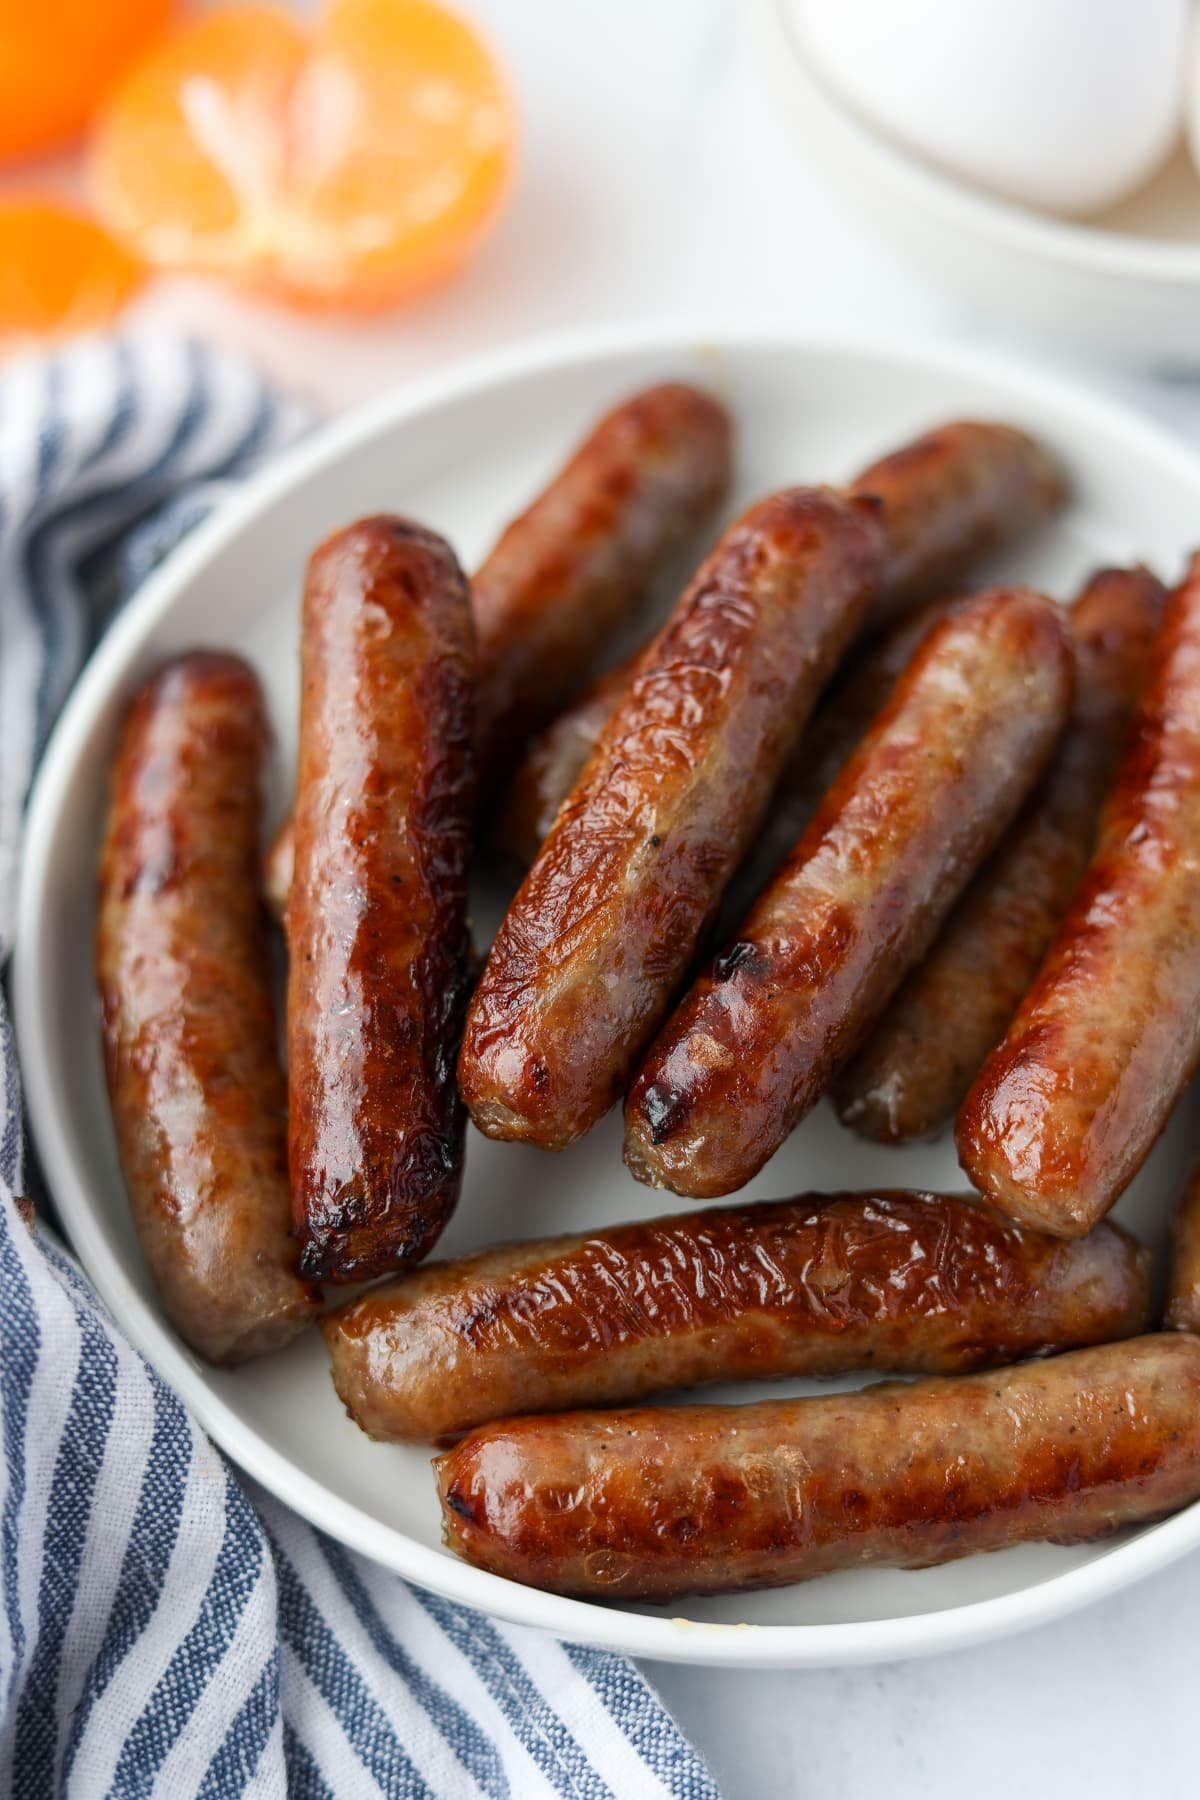 A plate of cooked breakfast sausages.